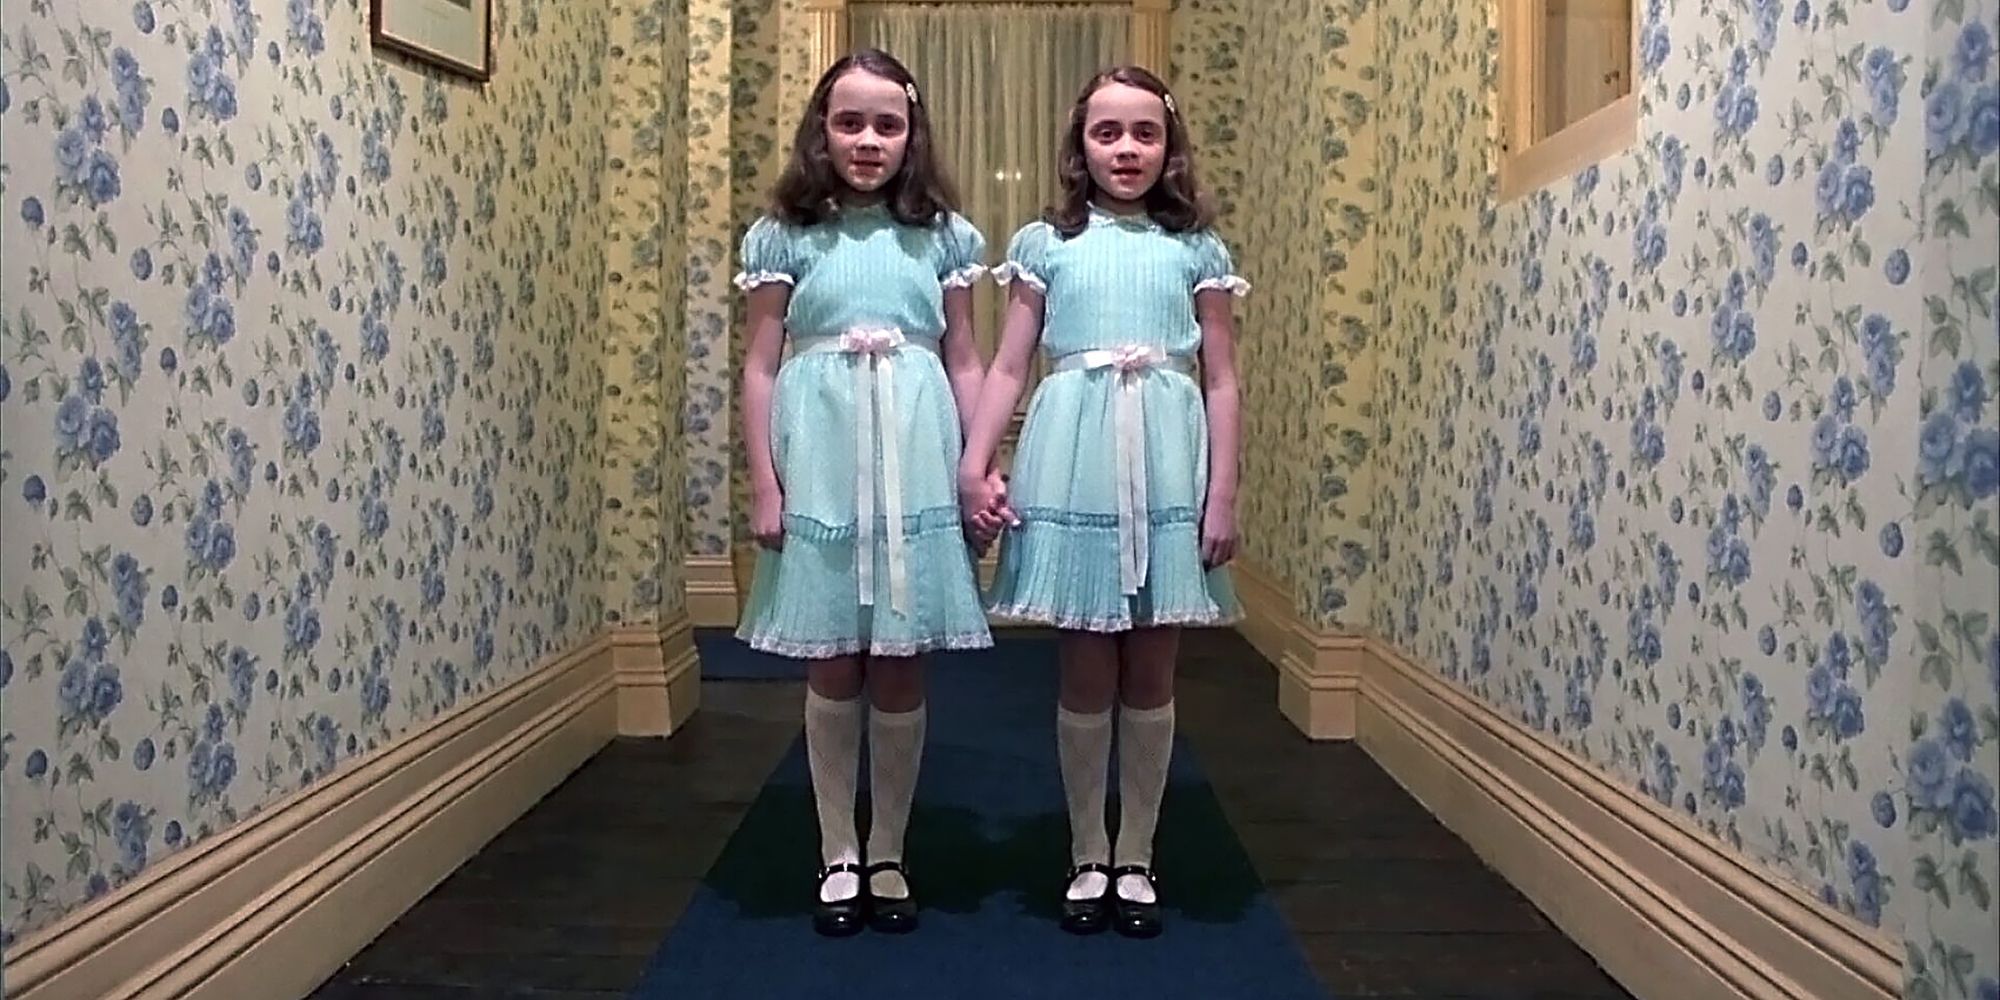 Stanley Kubrick's departure from Stephen King's source material made 'The Shining' more cerebral, and harder to understand